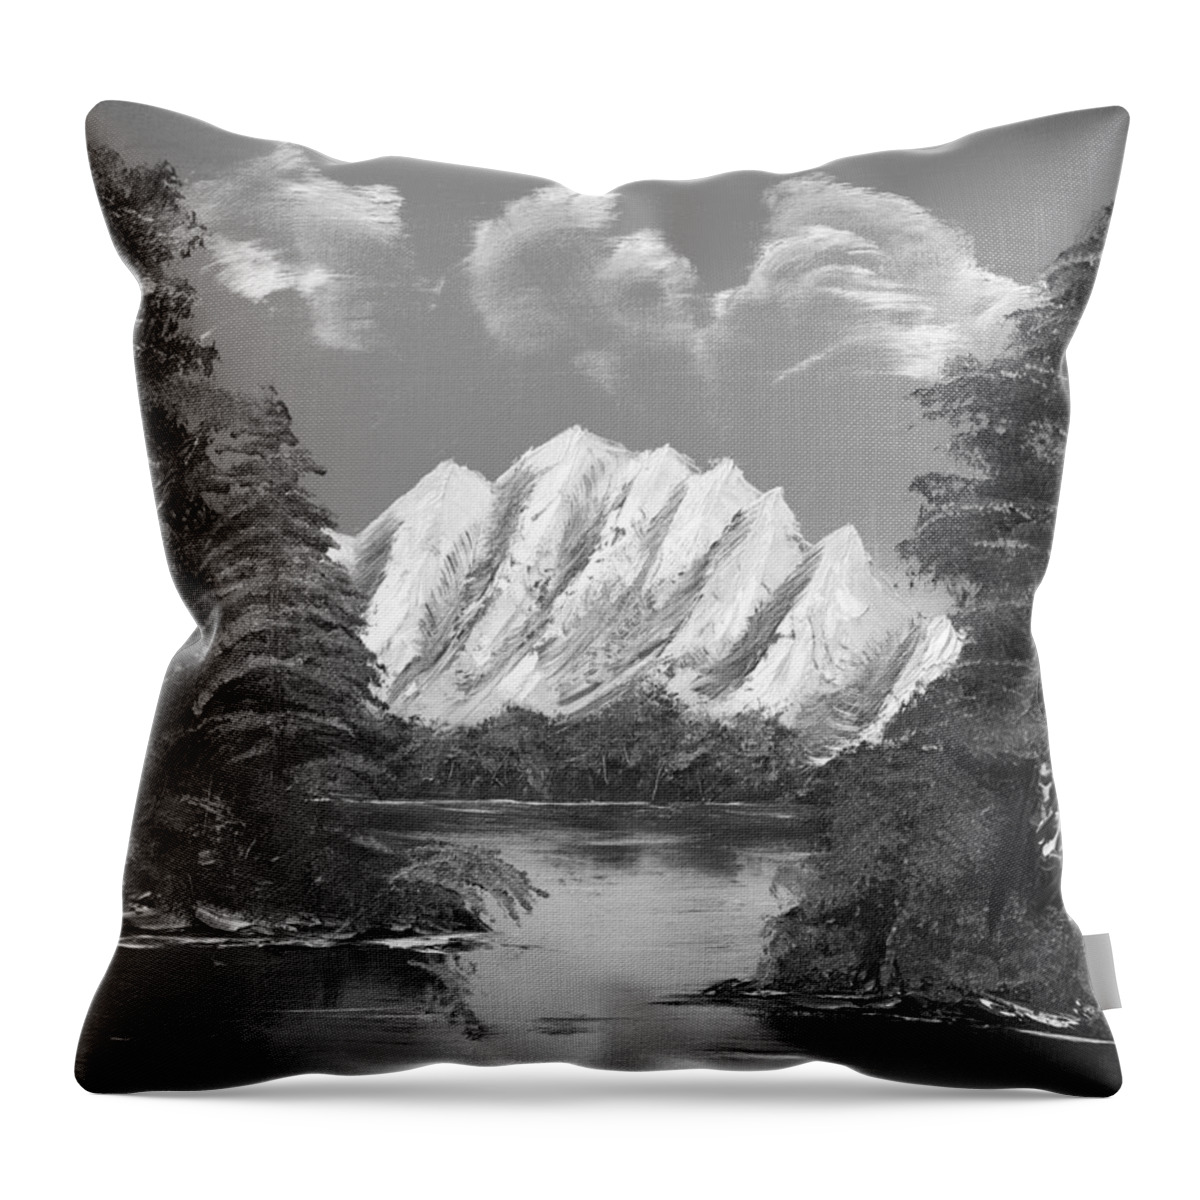 Black And White Throw Pillow featuring the painting Blue Lake Mirror Reflection In Black And White by Claude Beaulac